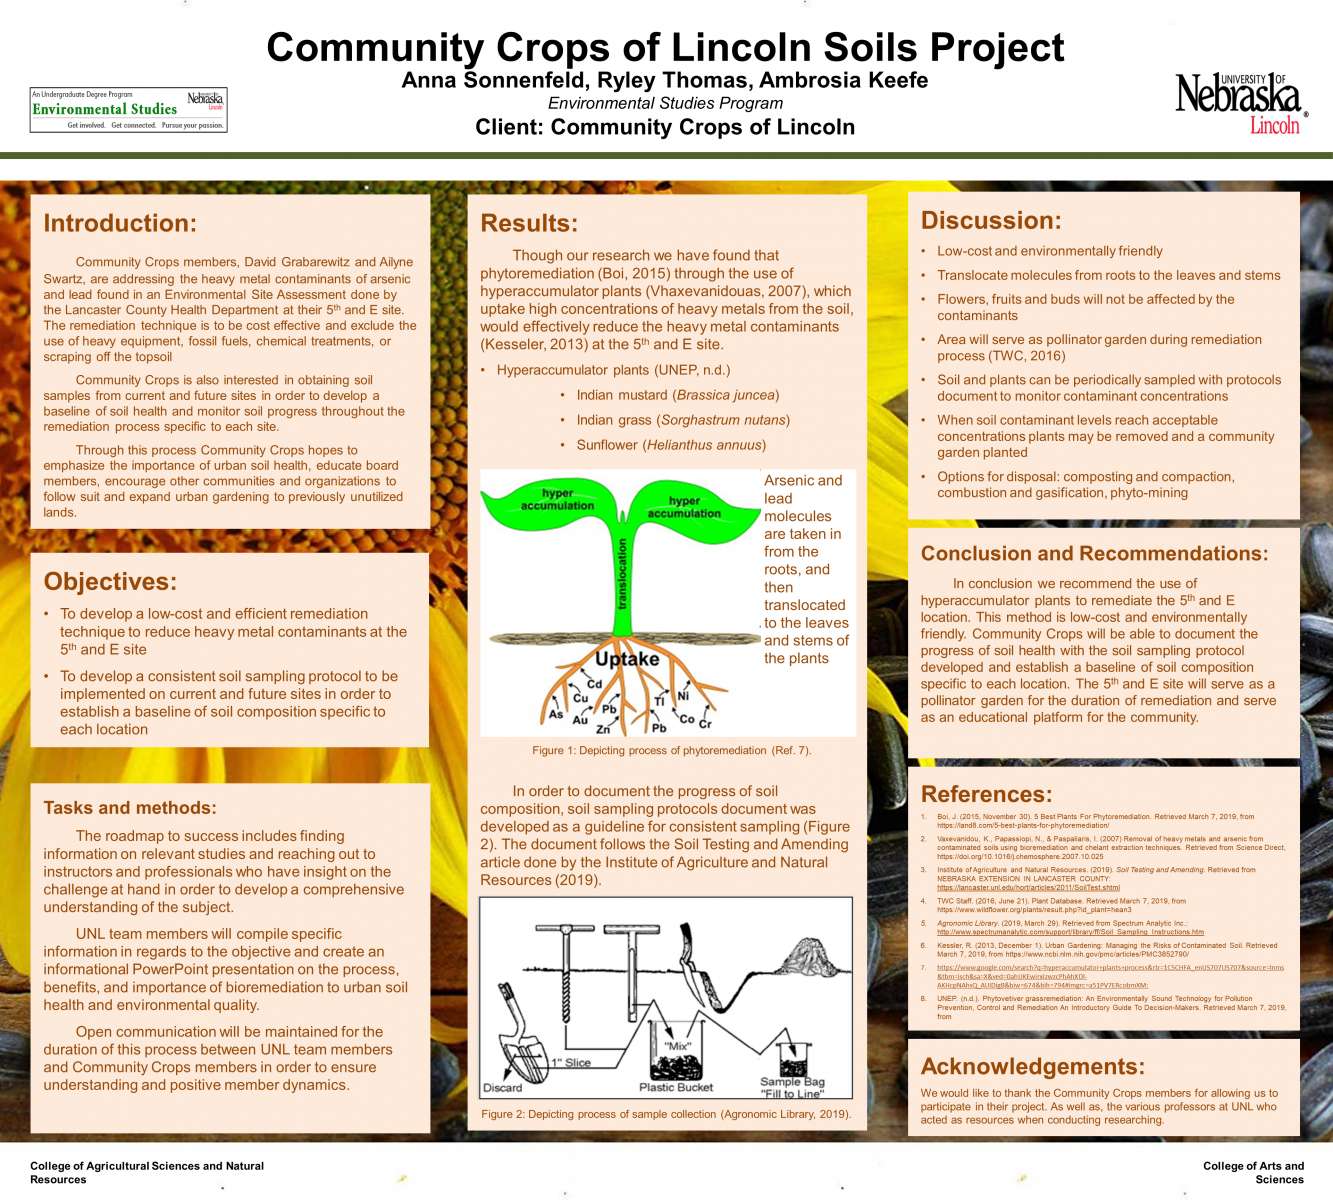 Community Crops of Lincoln Soils Project